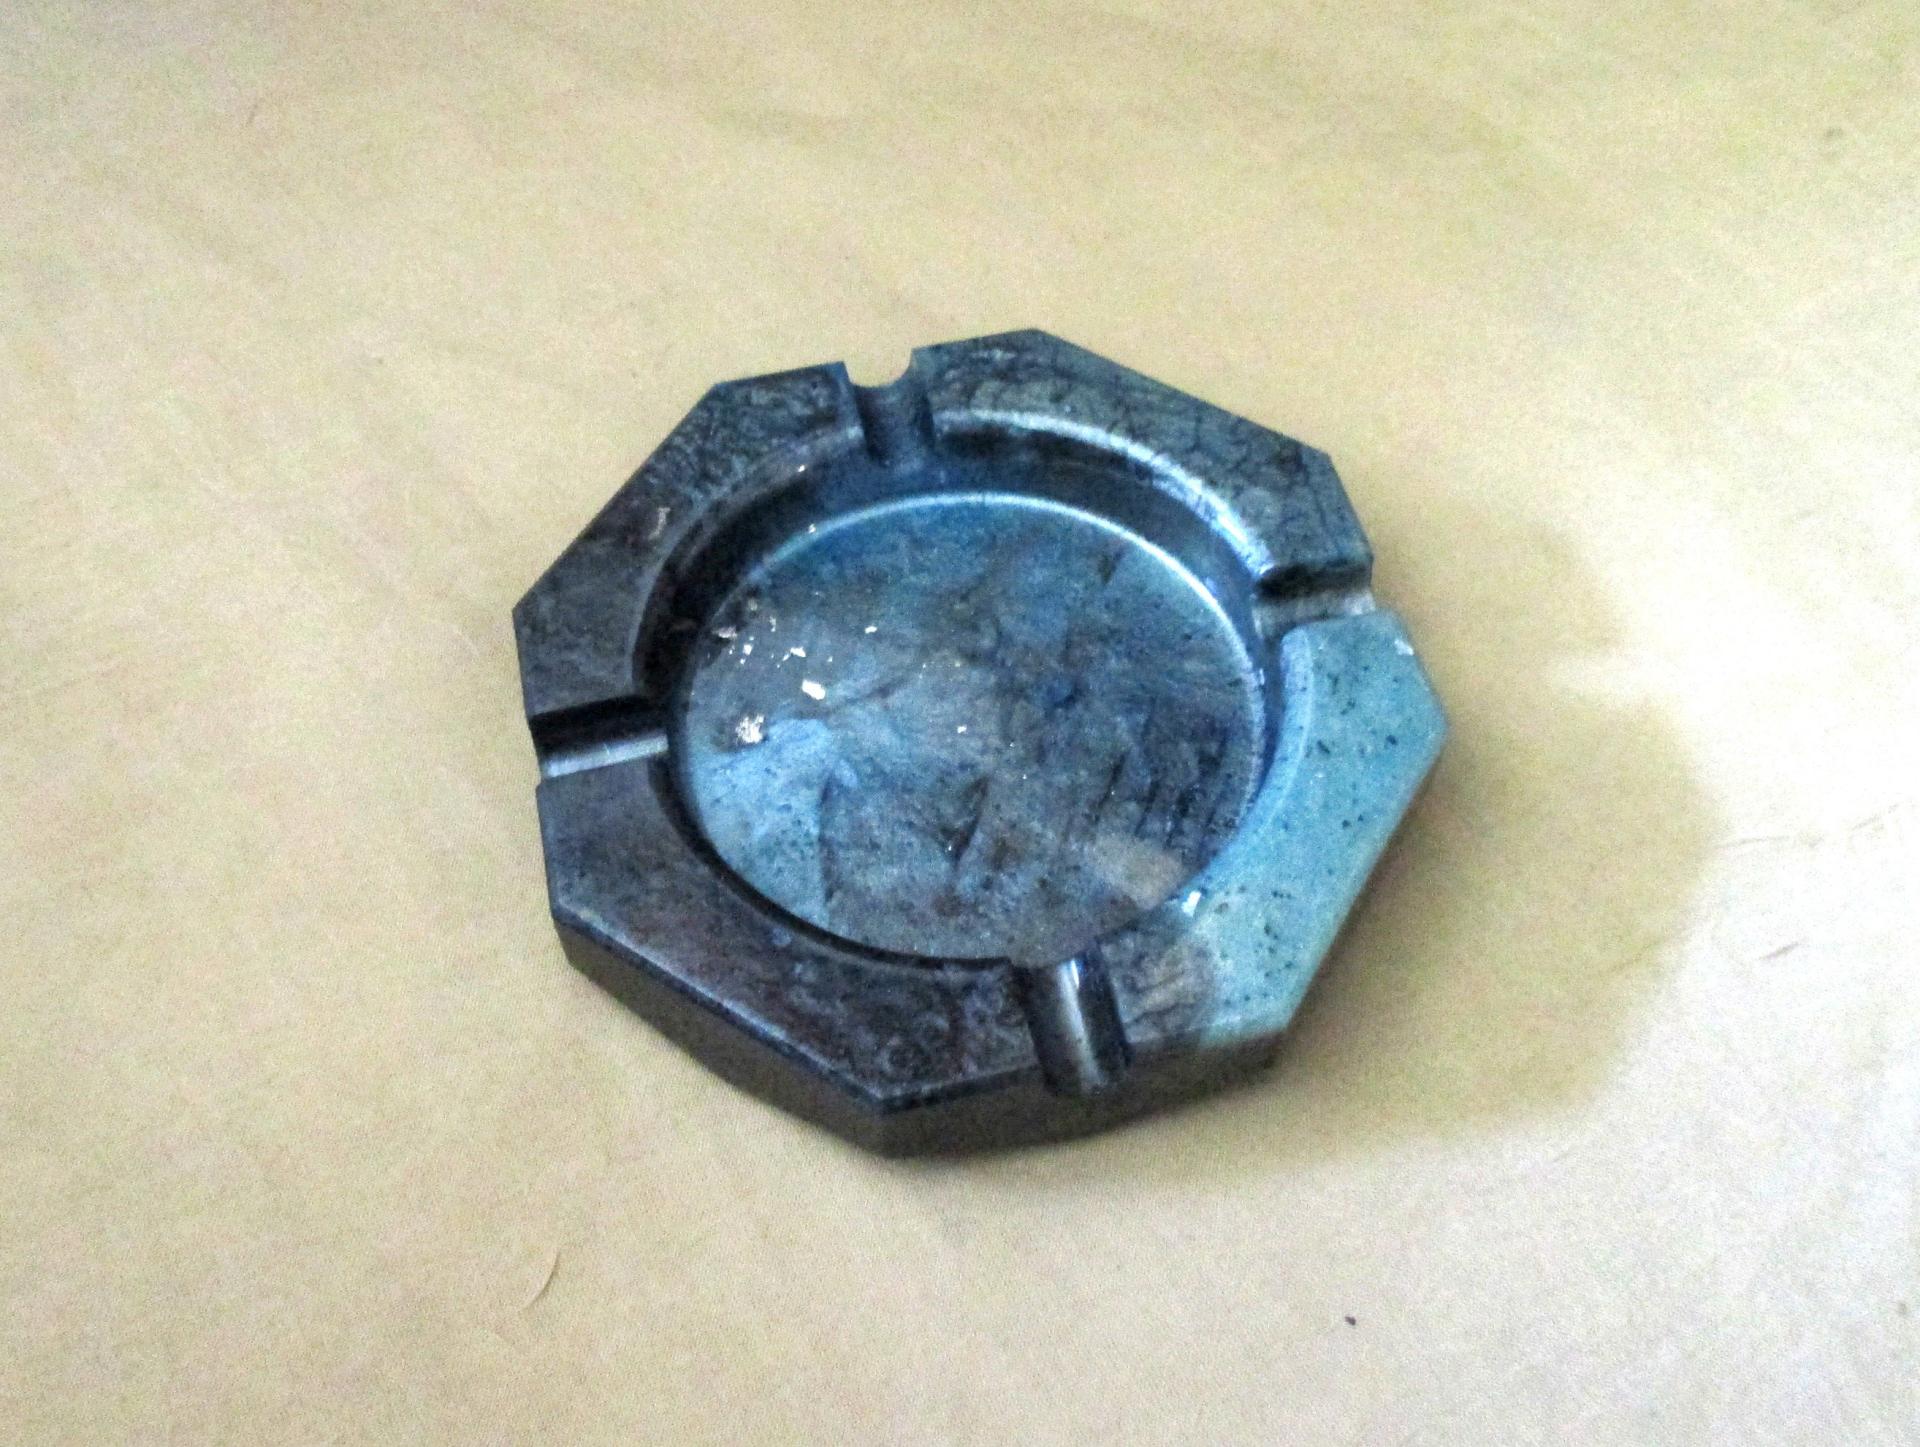 Ashtray Casting Mold - for Epoxy Resin, Clay or other Casting Mediums